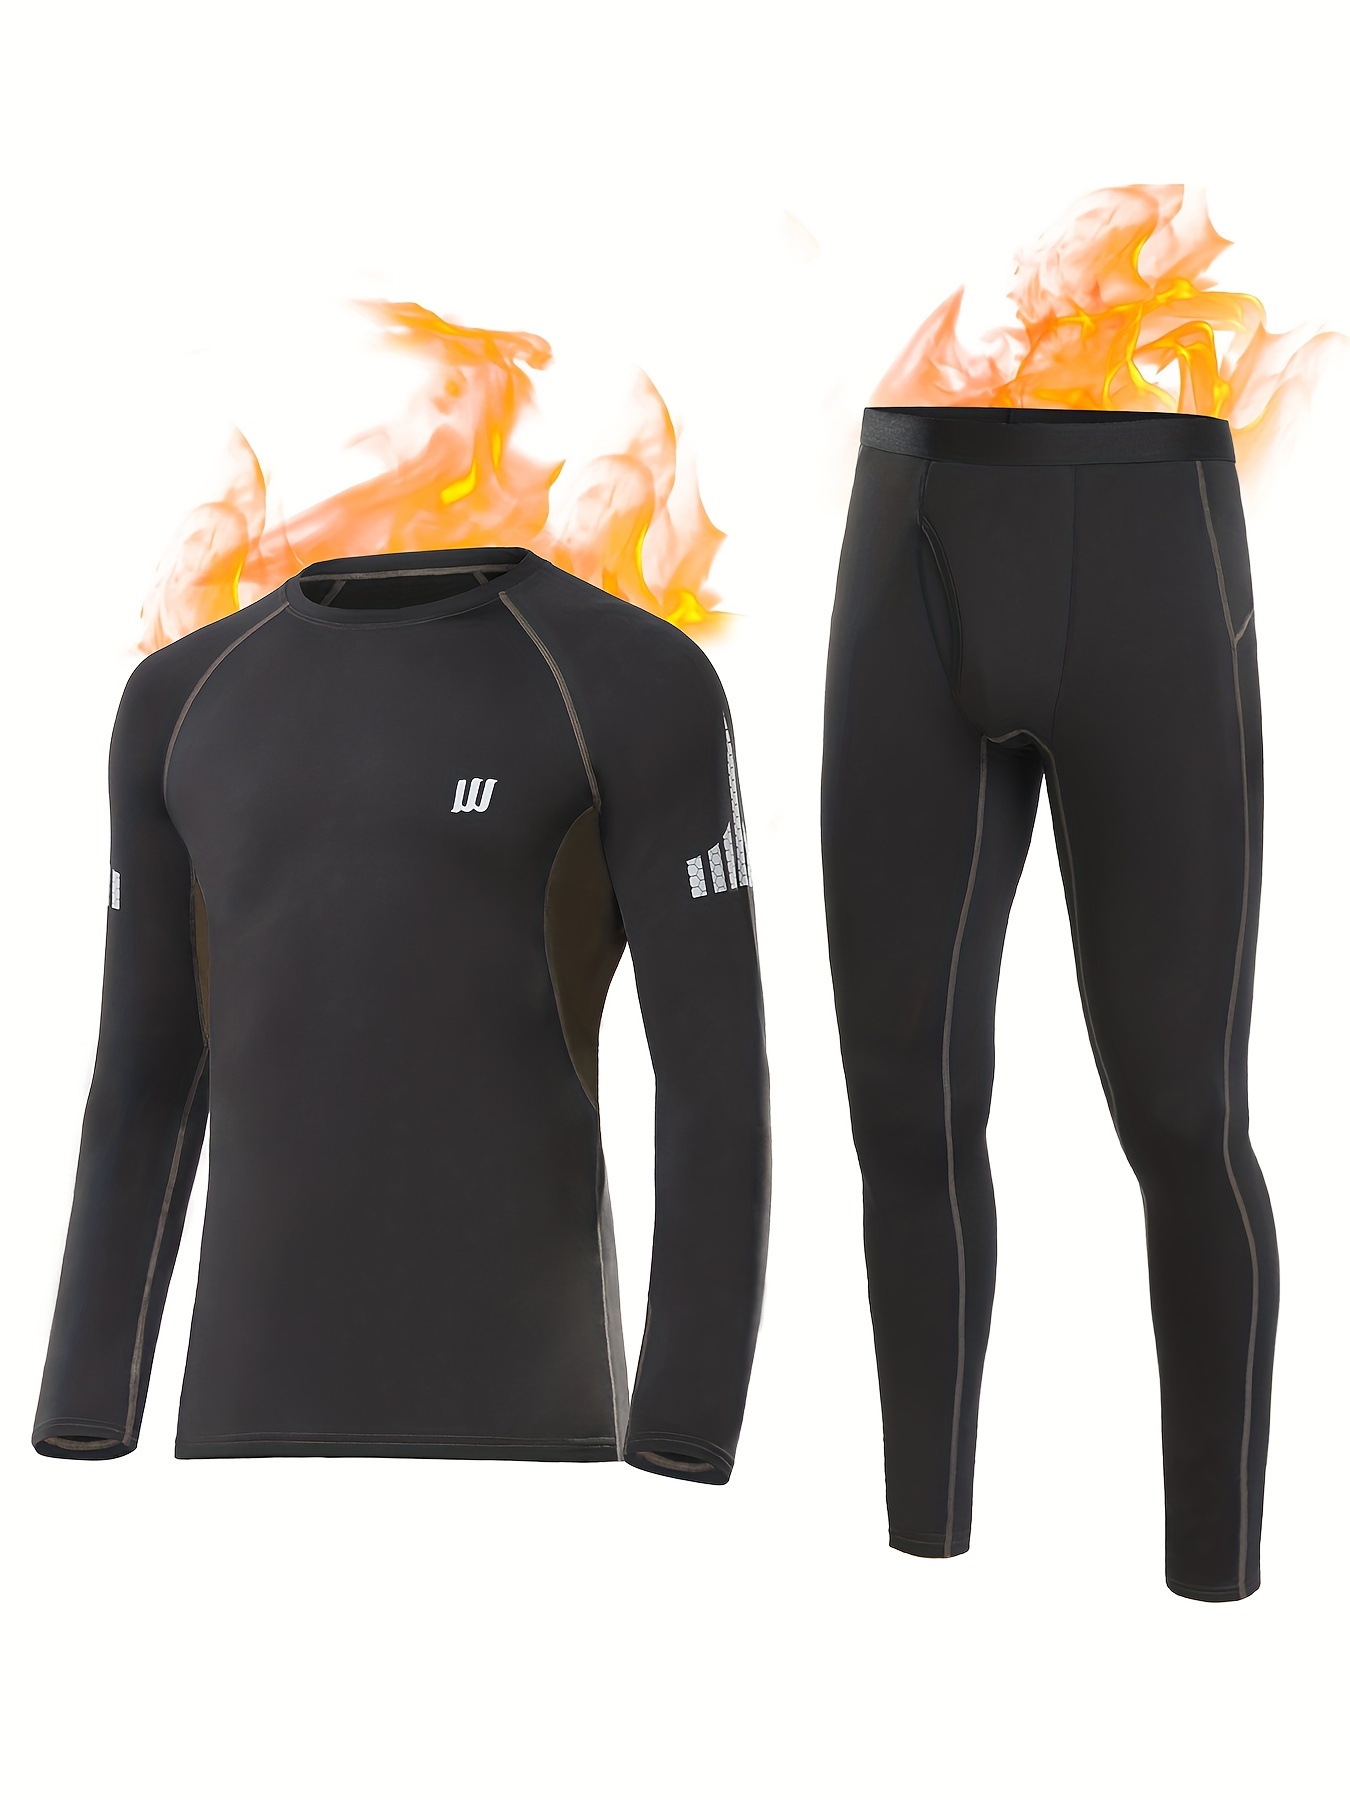 UNDER ARMOUR Winter Thermals & Baselayers